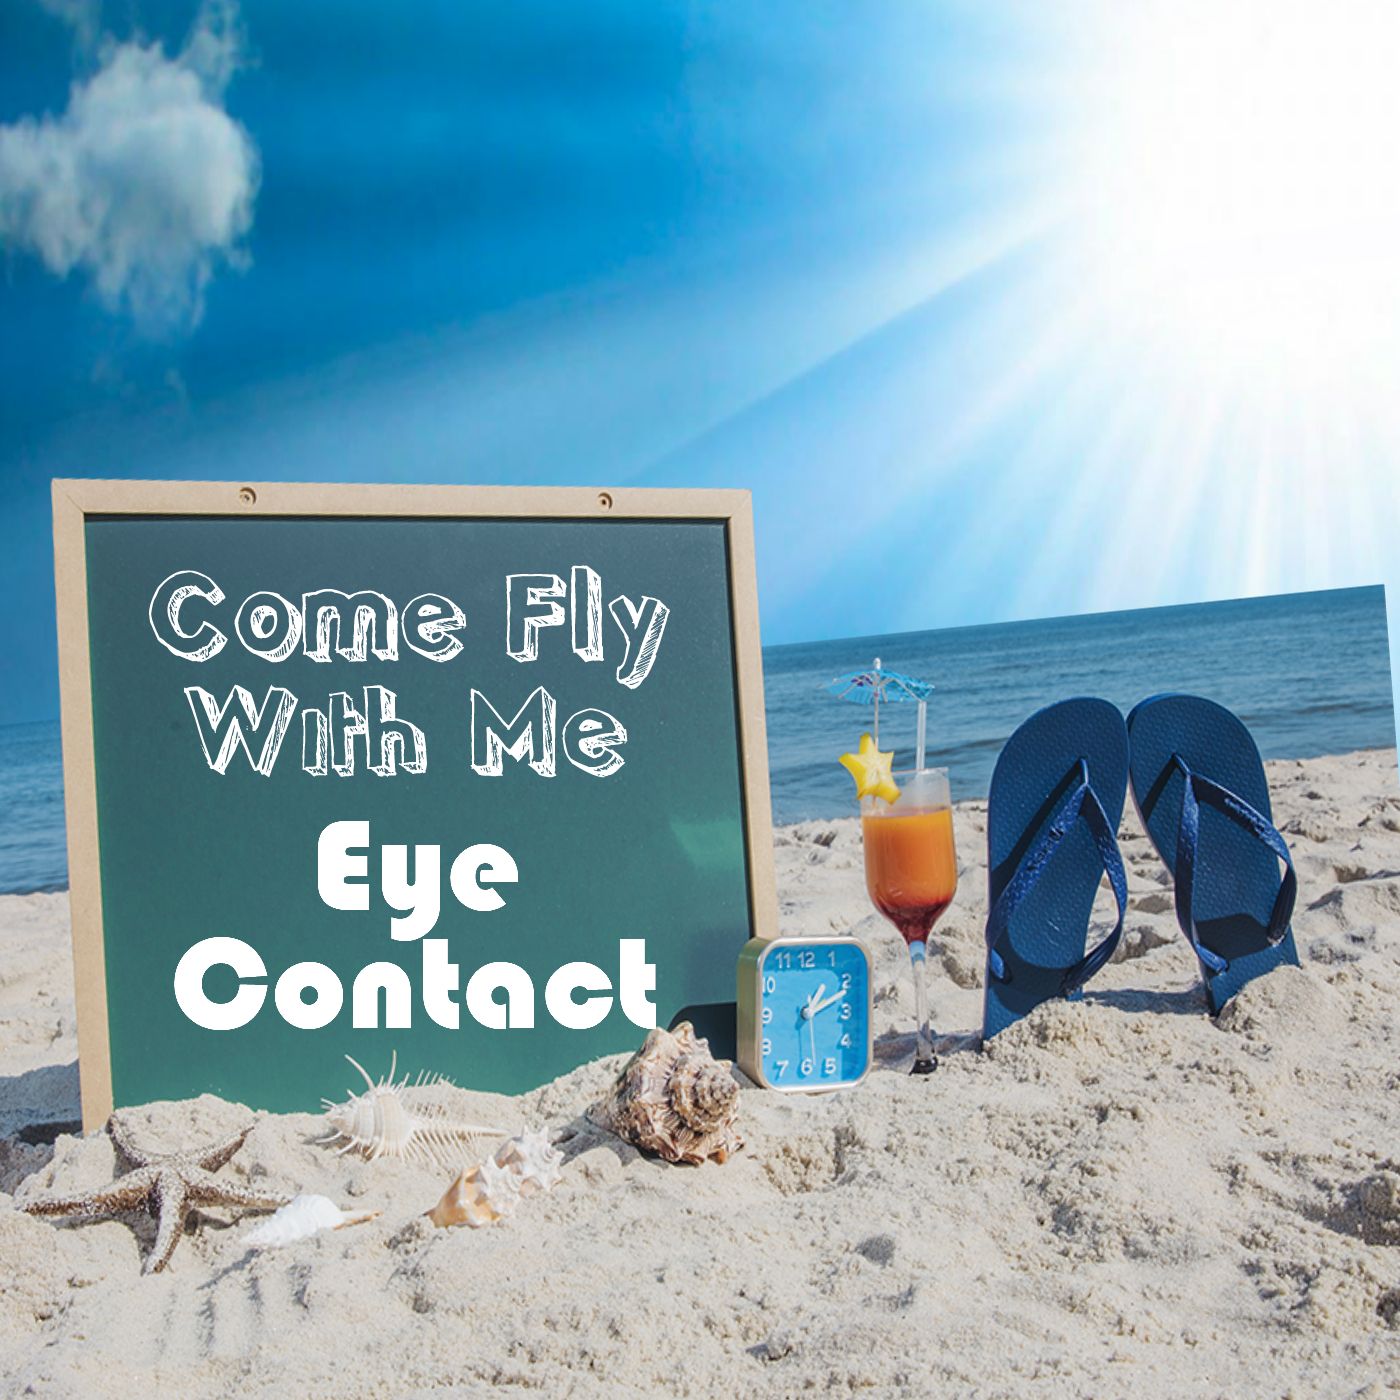 Making Eye Contact - A Travel Tip